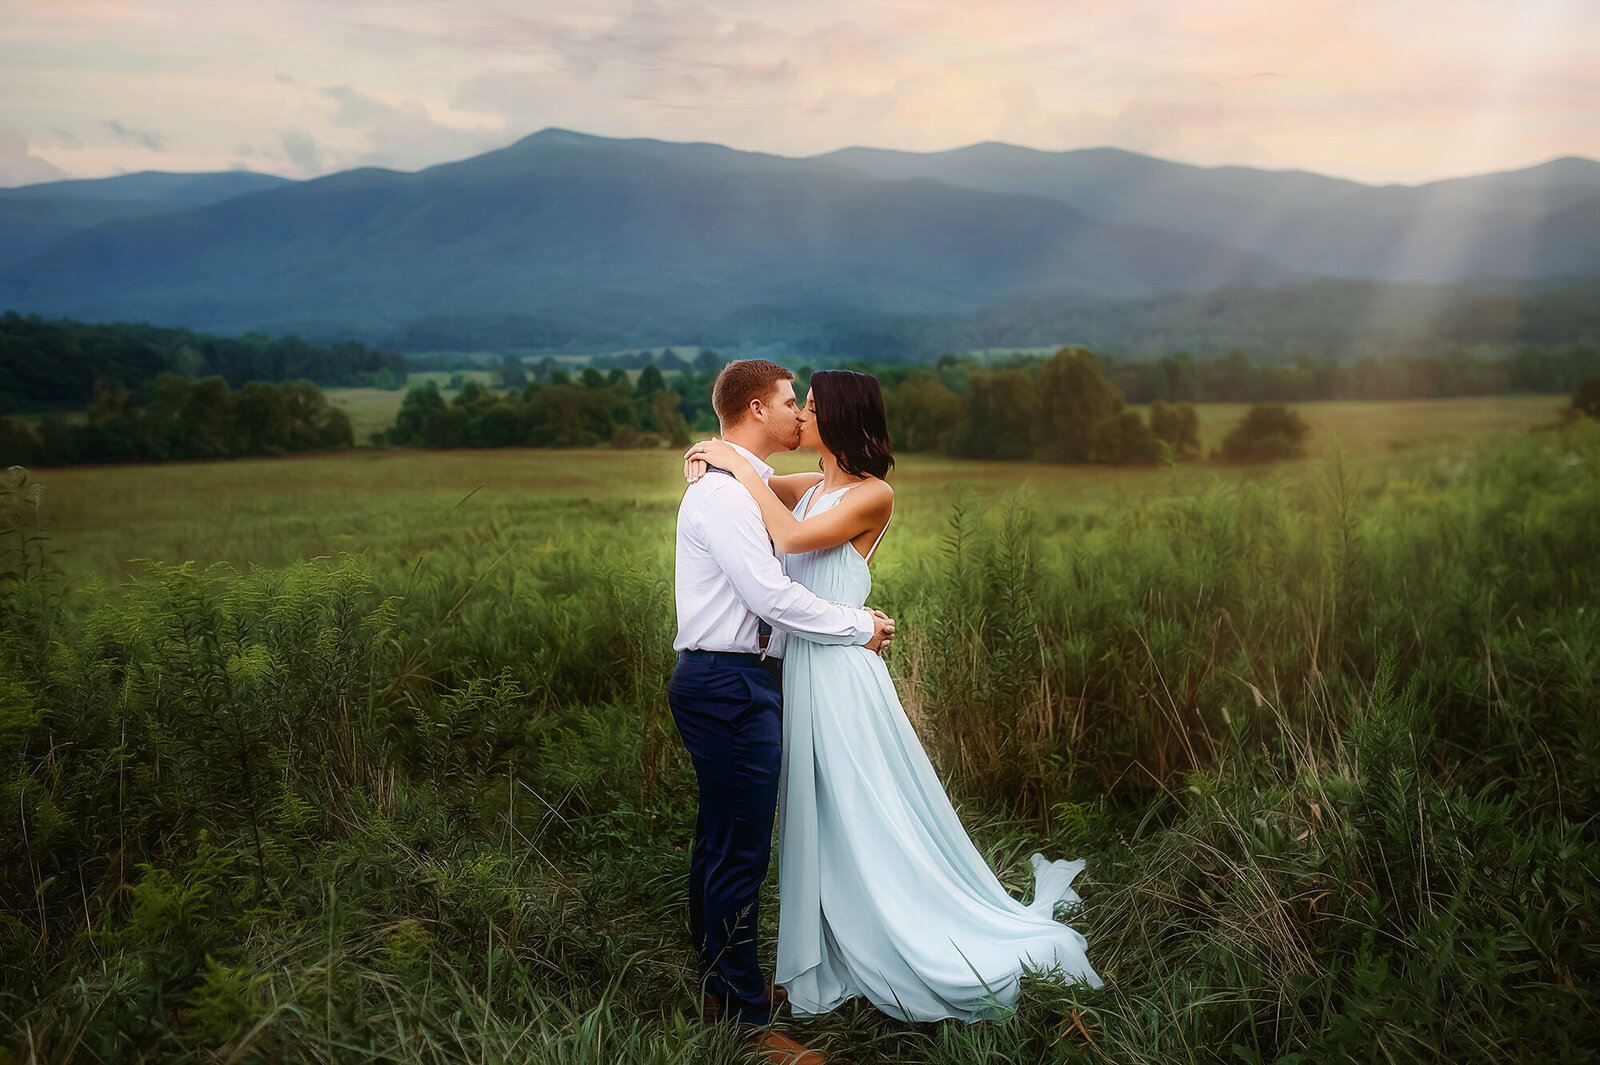 A couple poses for Engagement Photos in the Great Smokey Mountains National Park near Asheville, NC.